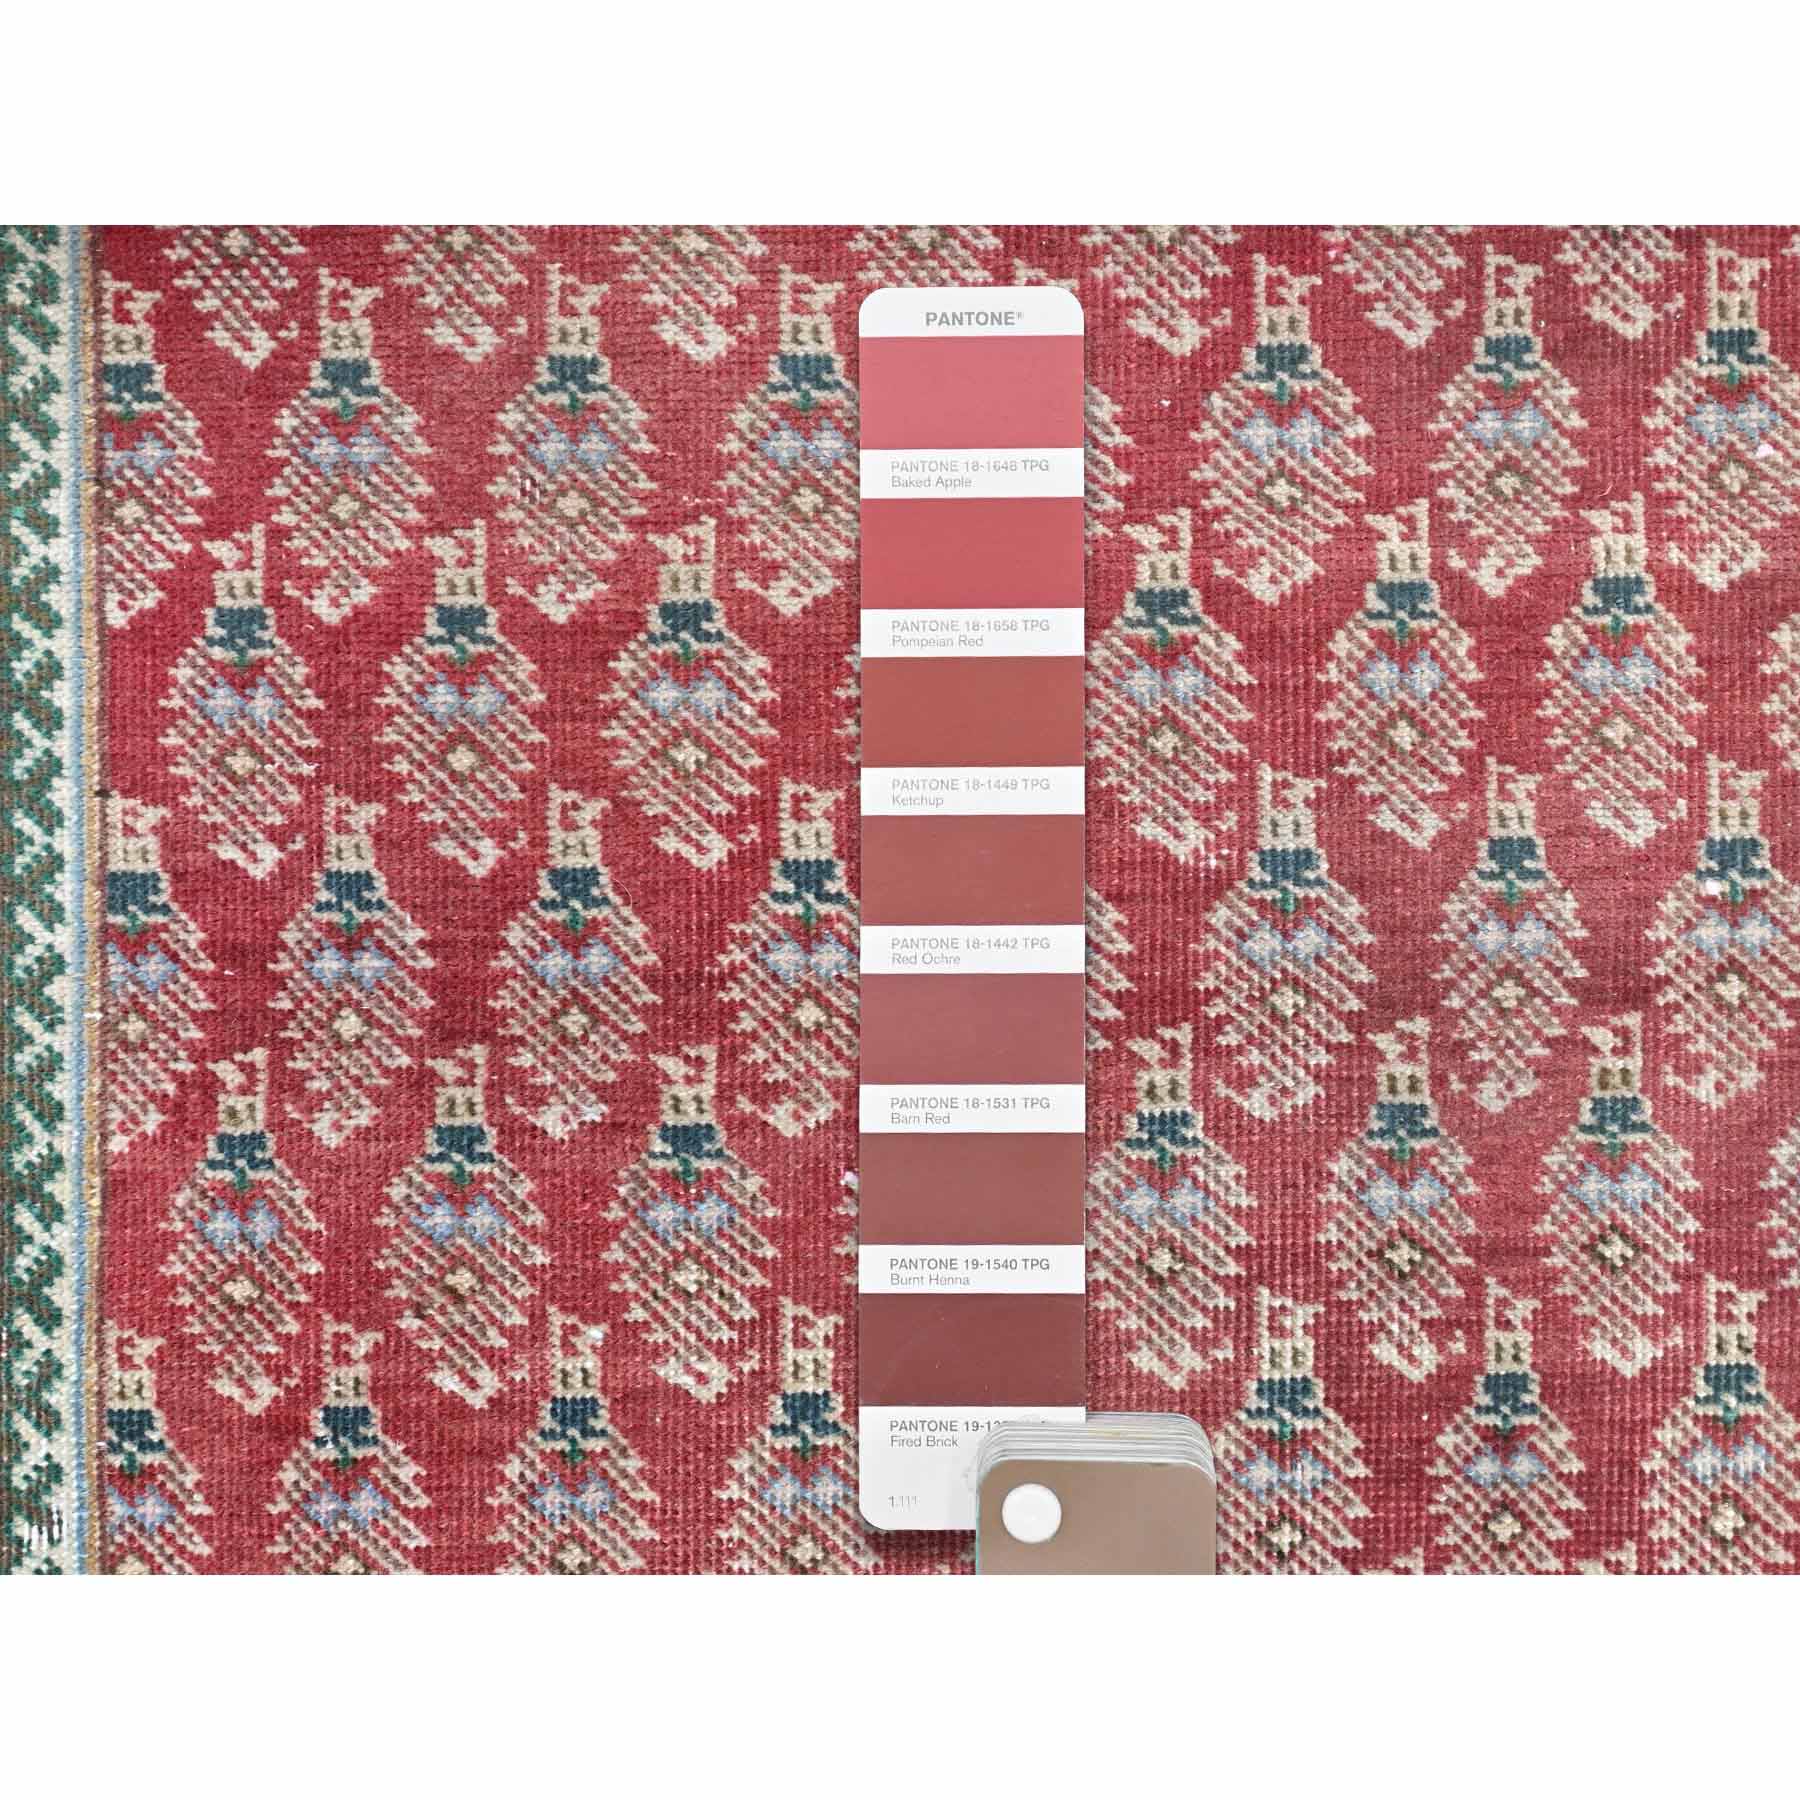 Overdyed-Vintage-Hand-Knotted-Rug-409475